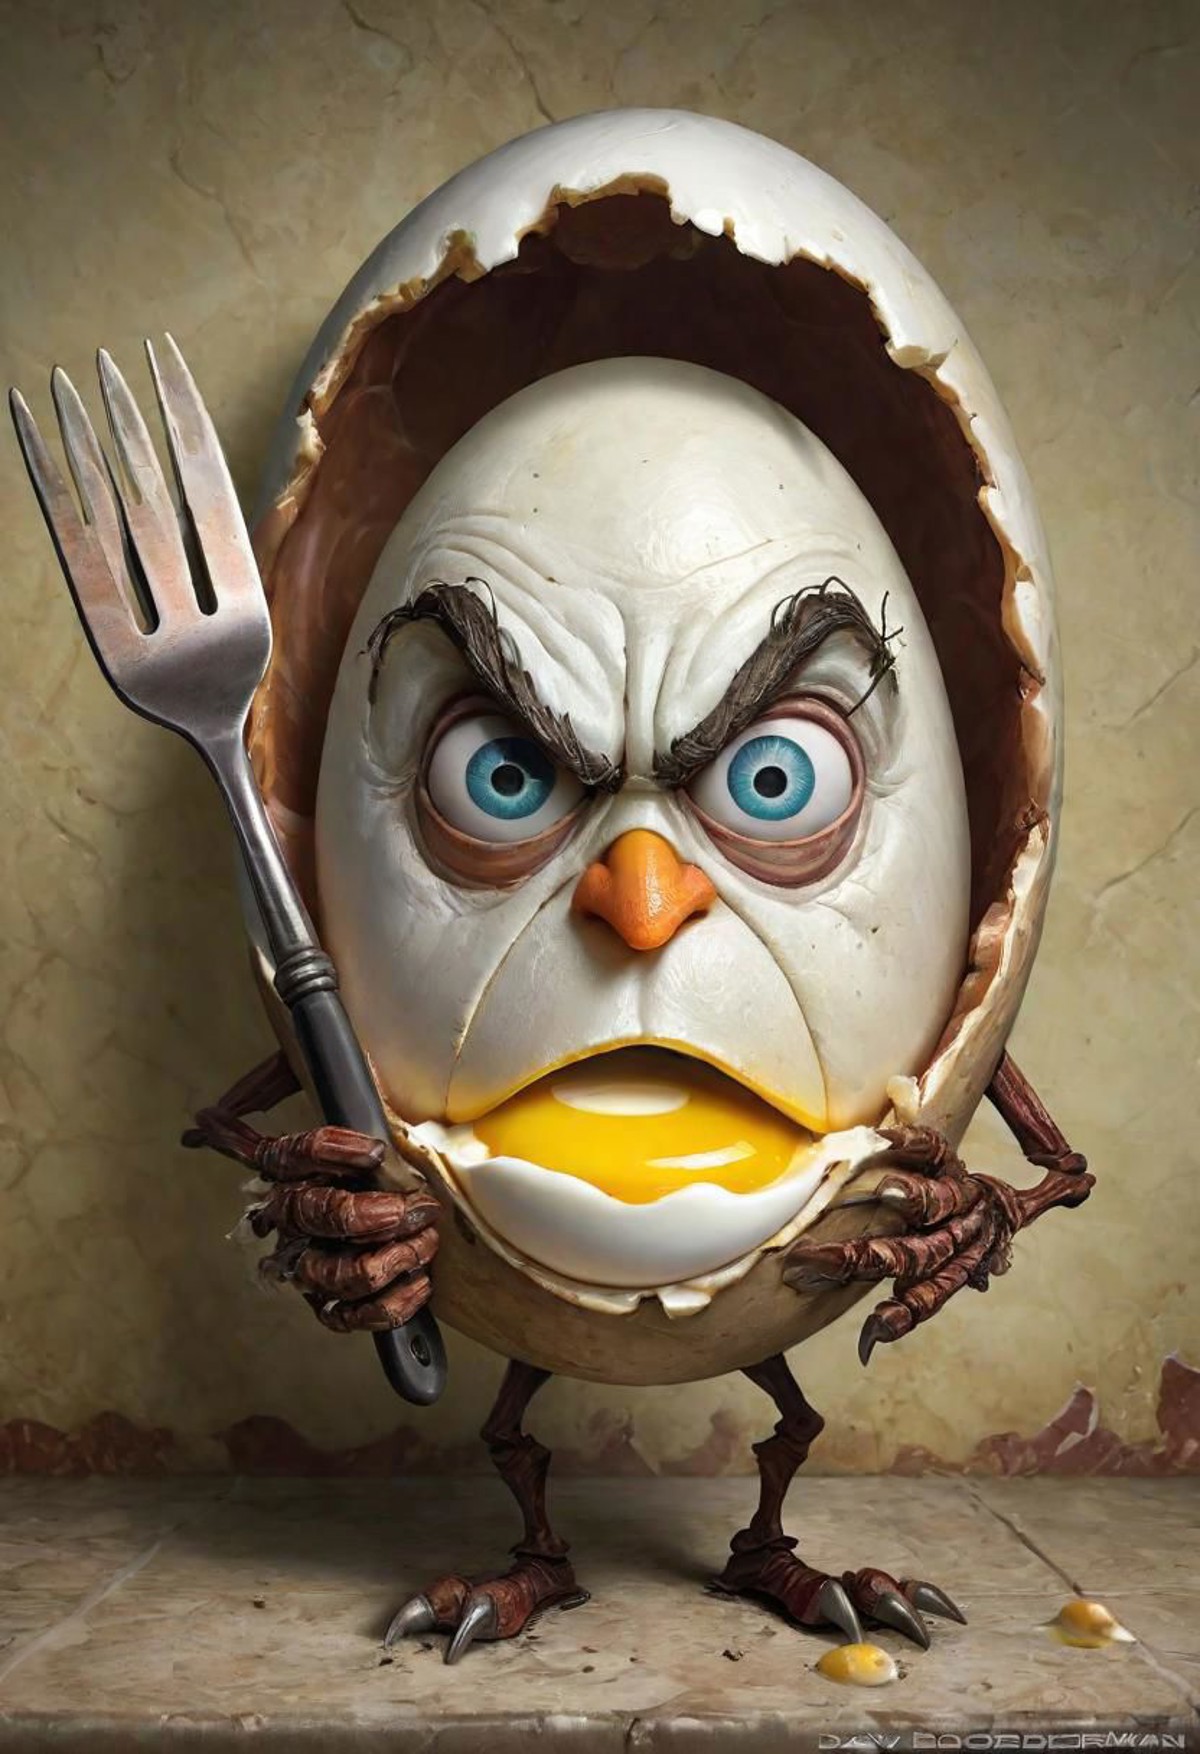 Rough hand caricature {hard boiled egg looks like a human head, in shell, white and yolk separated, spatula stuck in}, abs...